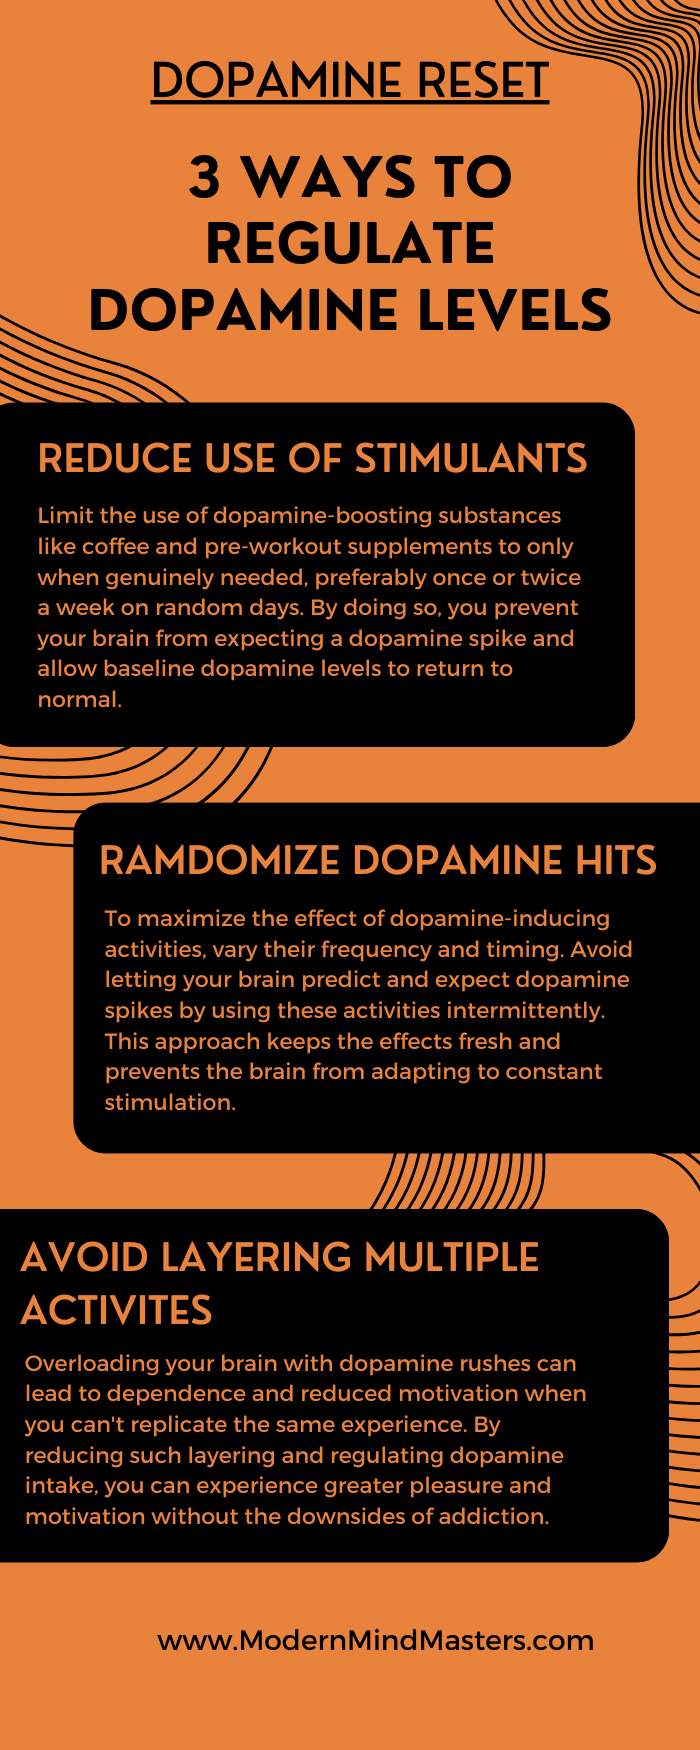 Resetting and regulating your dopamine levels using these techniques will improve cognitive performance.